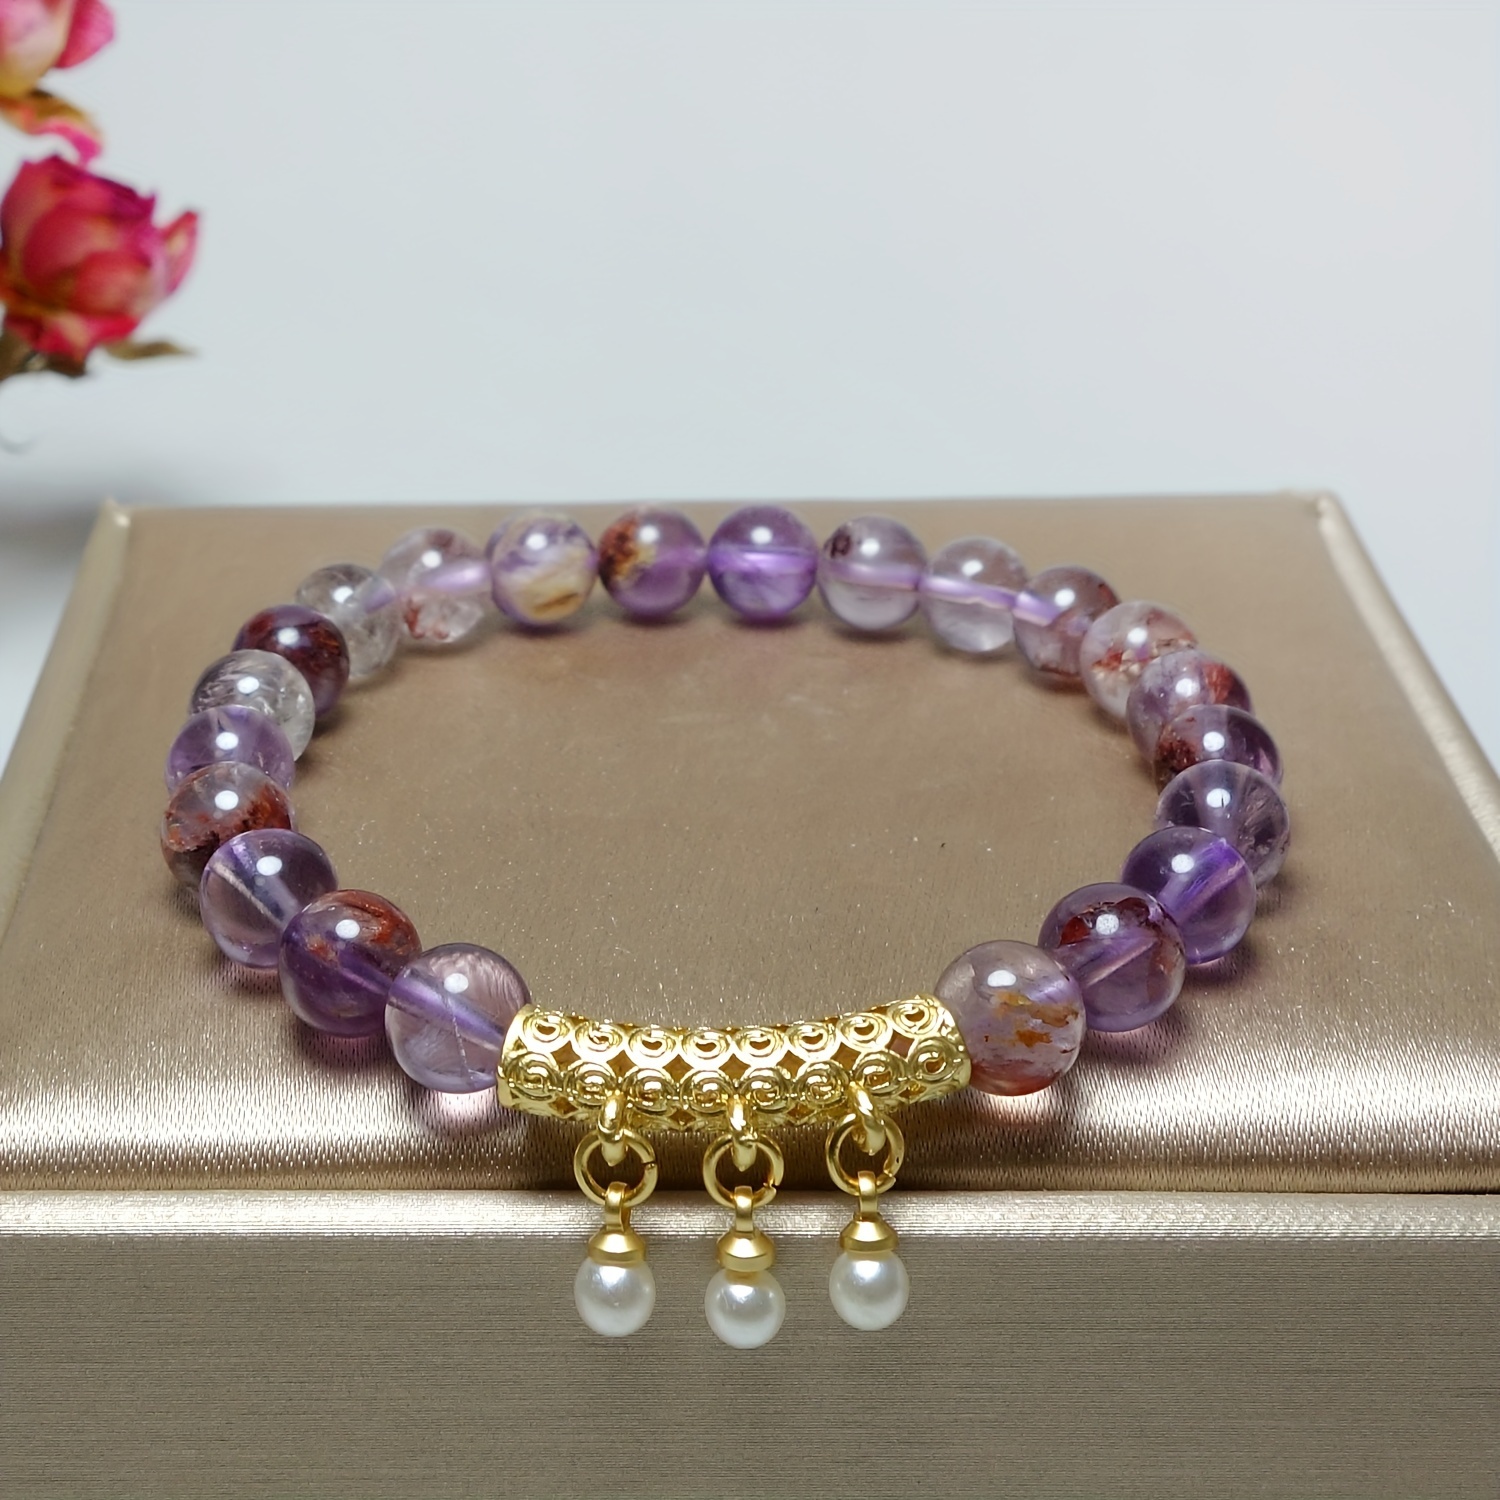 

Natural Amethyst Bracelet For Men And Women, The Best Gift For Parents And Friends